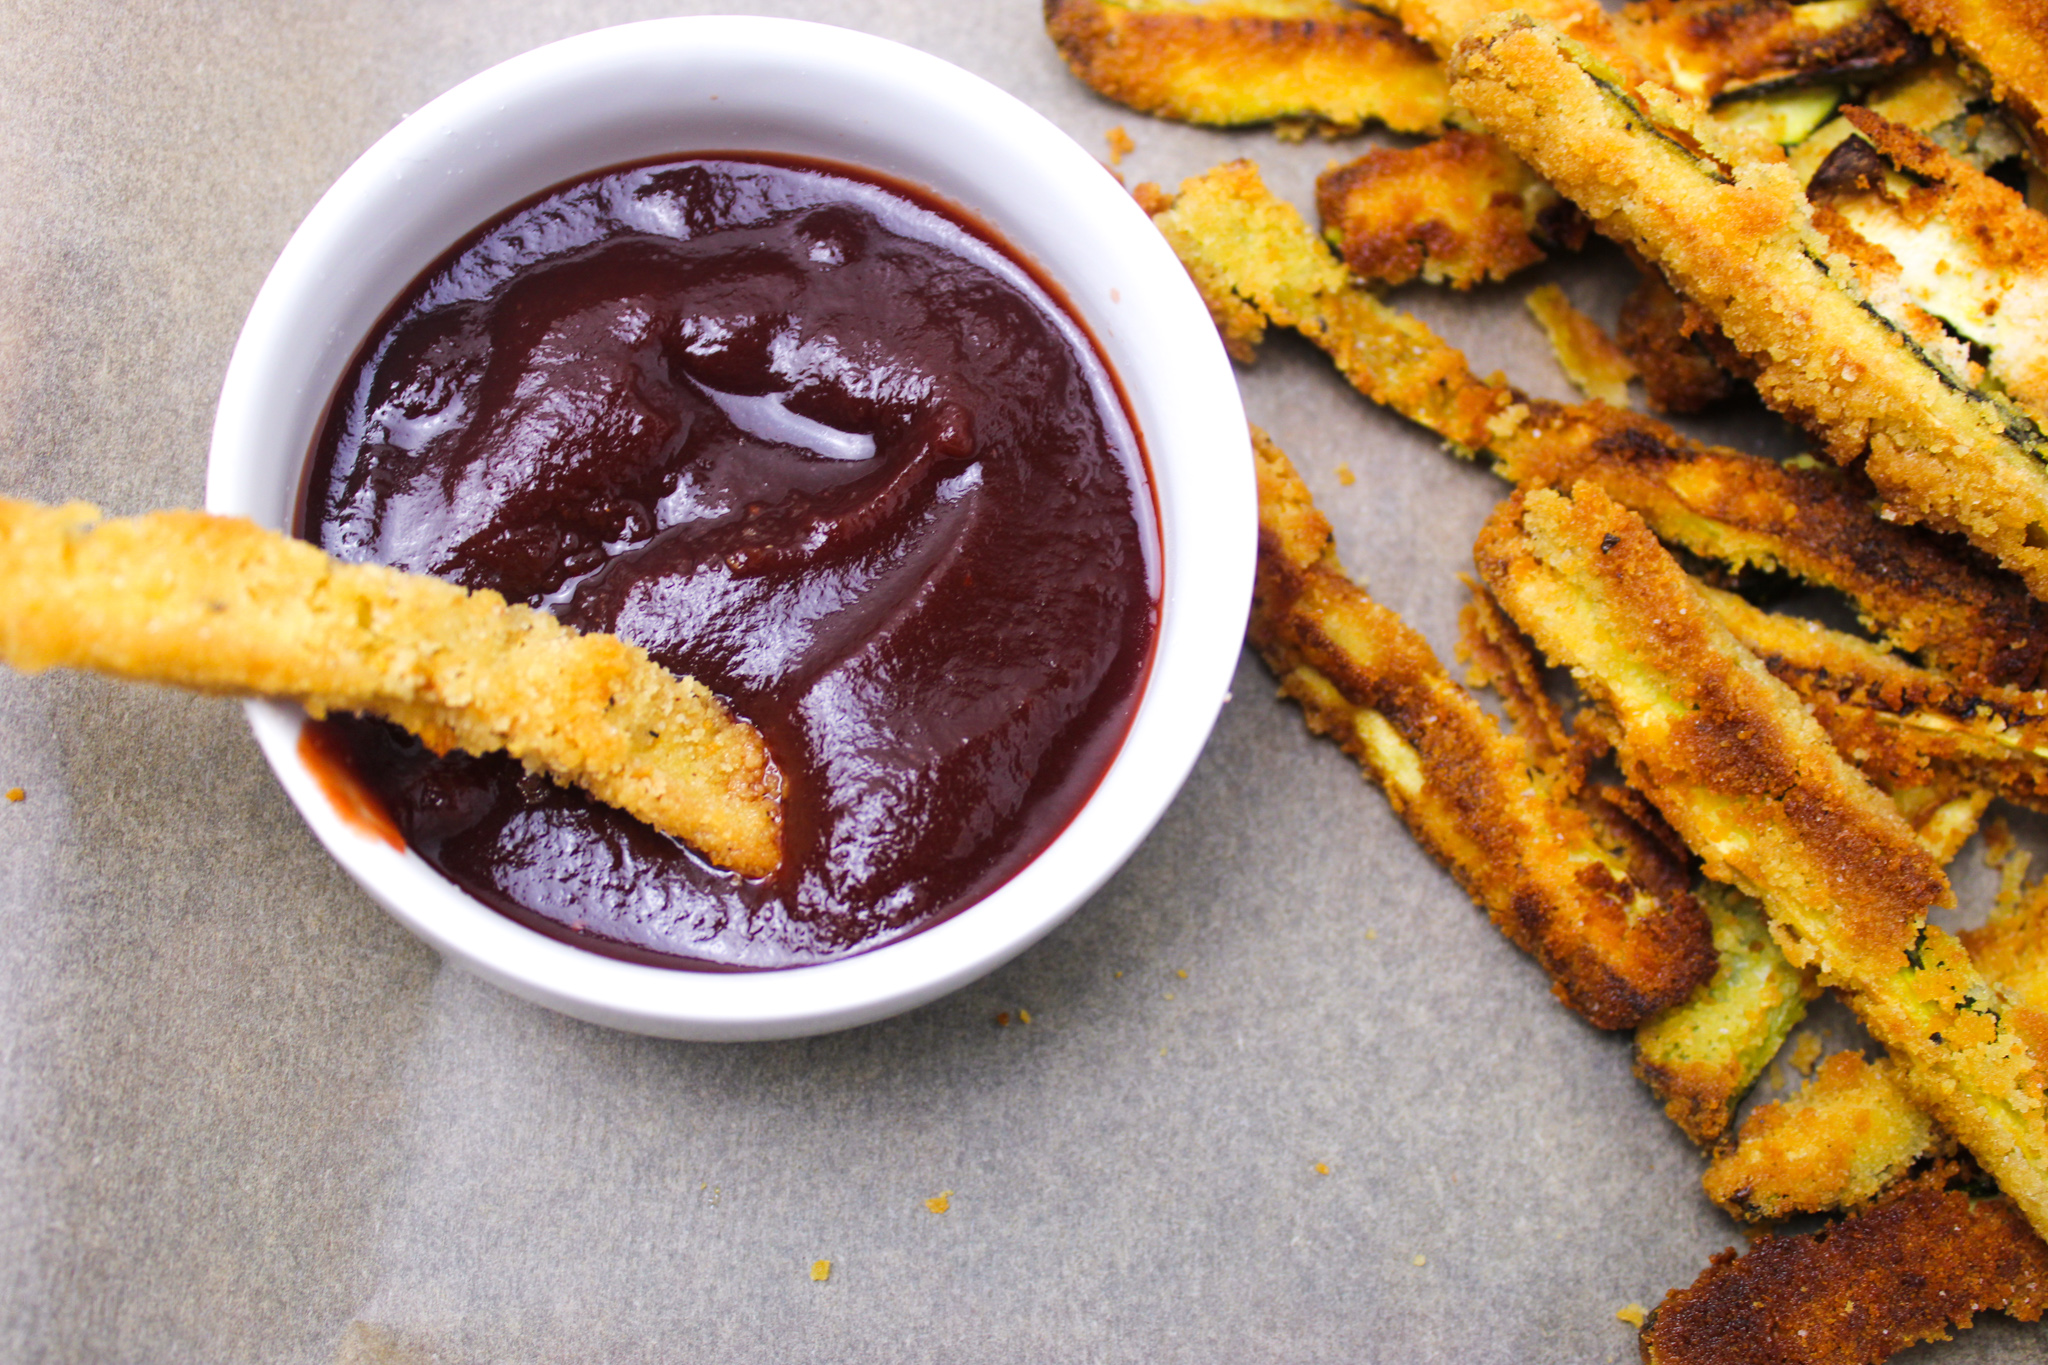 Zucchini Fries with beet ketchup